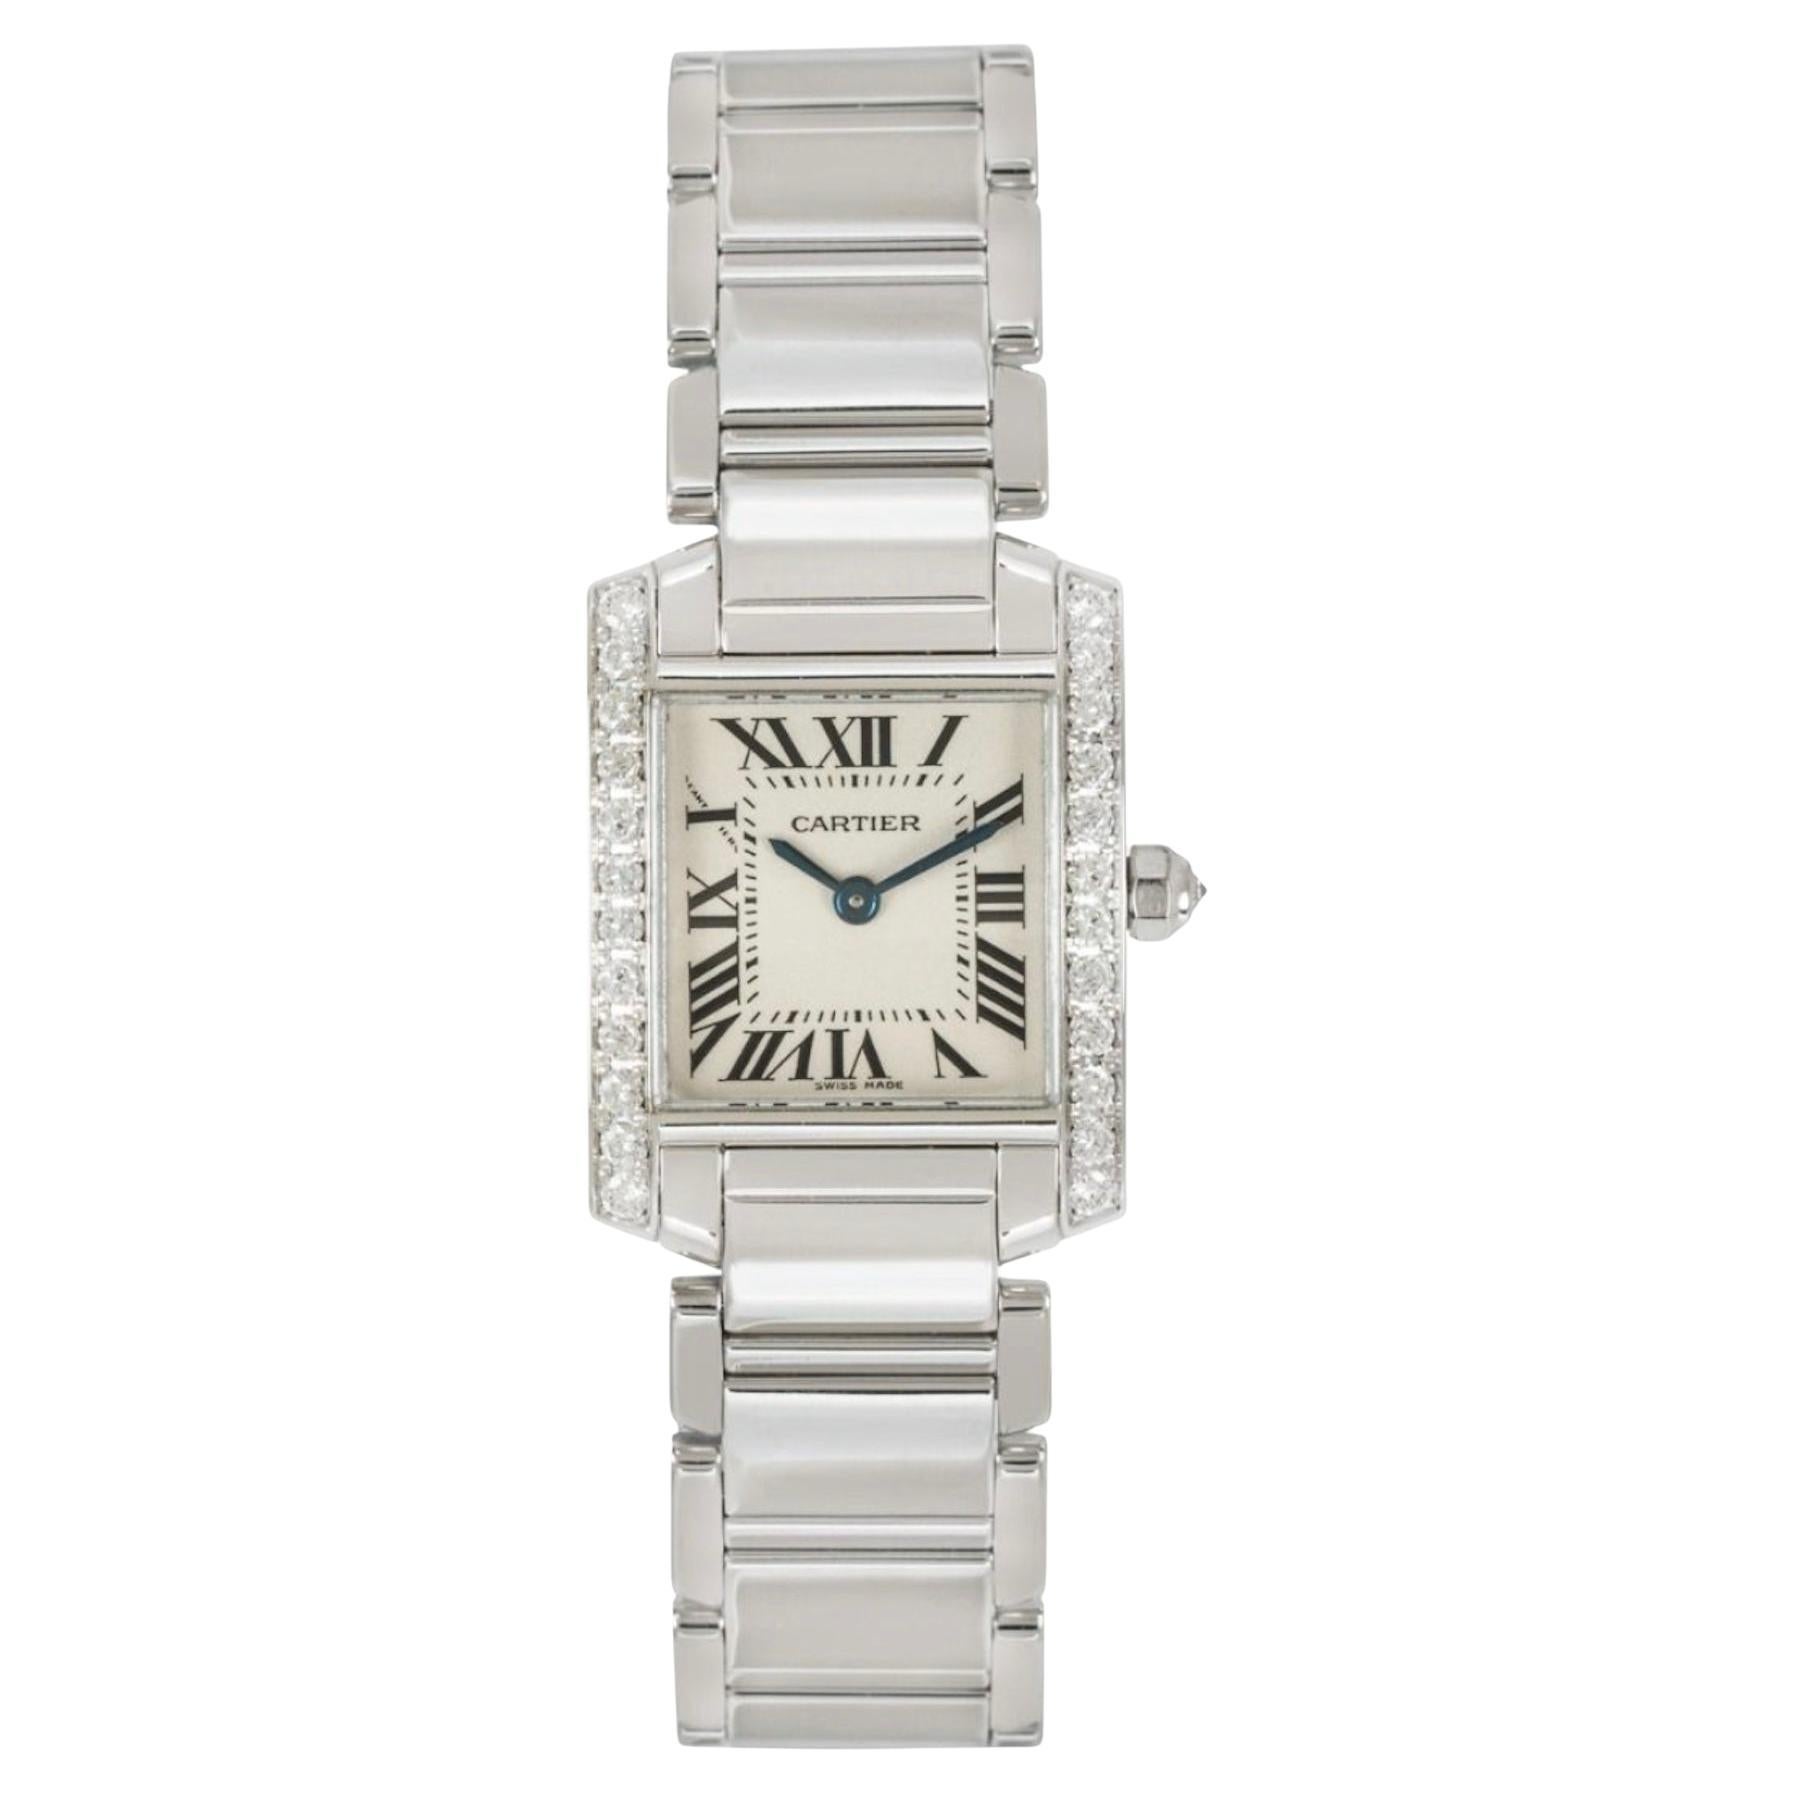 A ladies 20mm Cartier tank Francaise in white gold. Featuring a silver dial with roman numerals, blued-steel sword-shaped hands, a secret Cartier signature at 'X' and a white gold bezel set with 24 round brilliant cut diamonds as well as a crown set